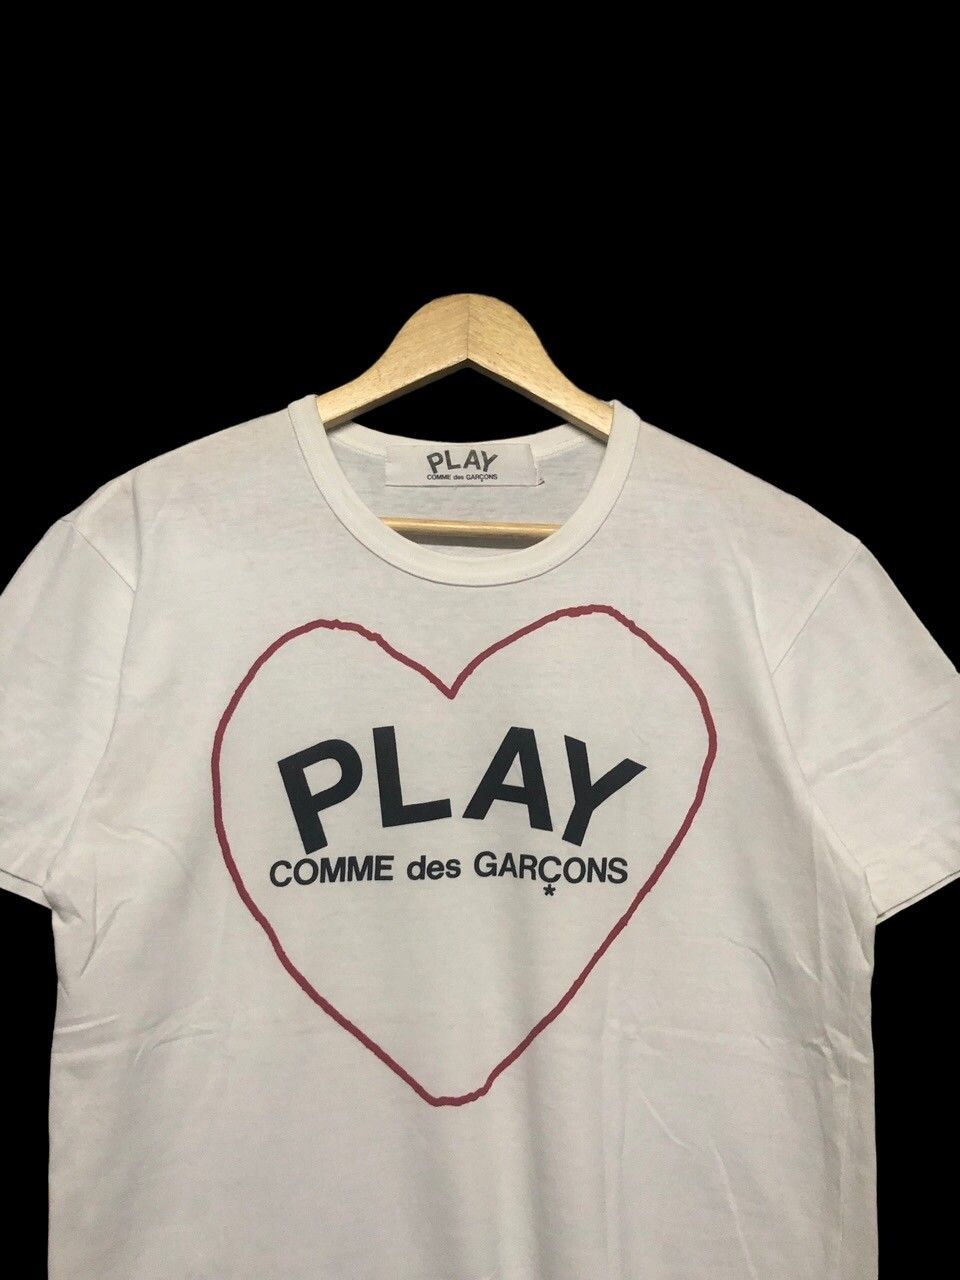 AD2005 Comme Des Garcons Play Tee - 5